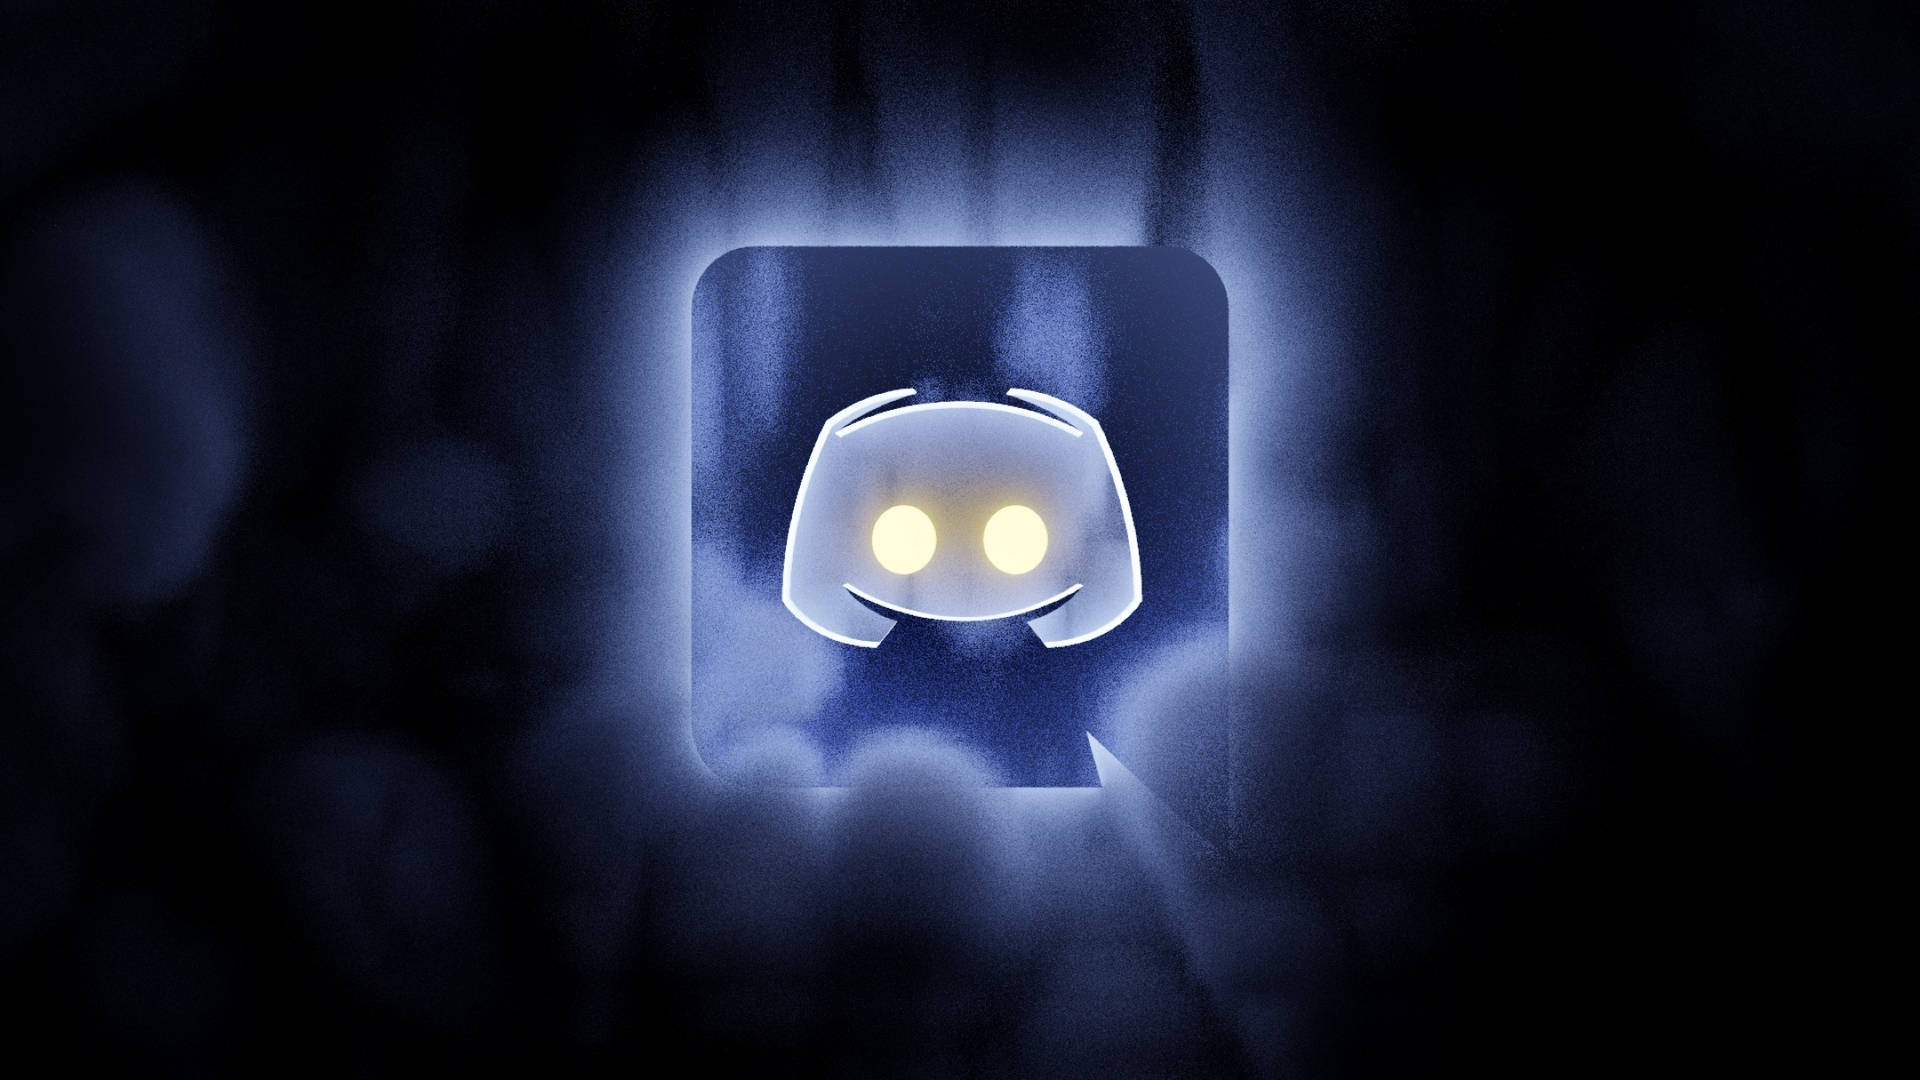 Top Discord Wallpaper Full HD K Free To Use